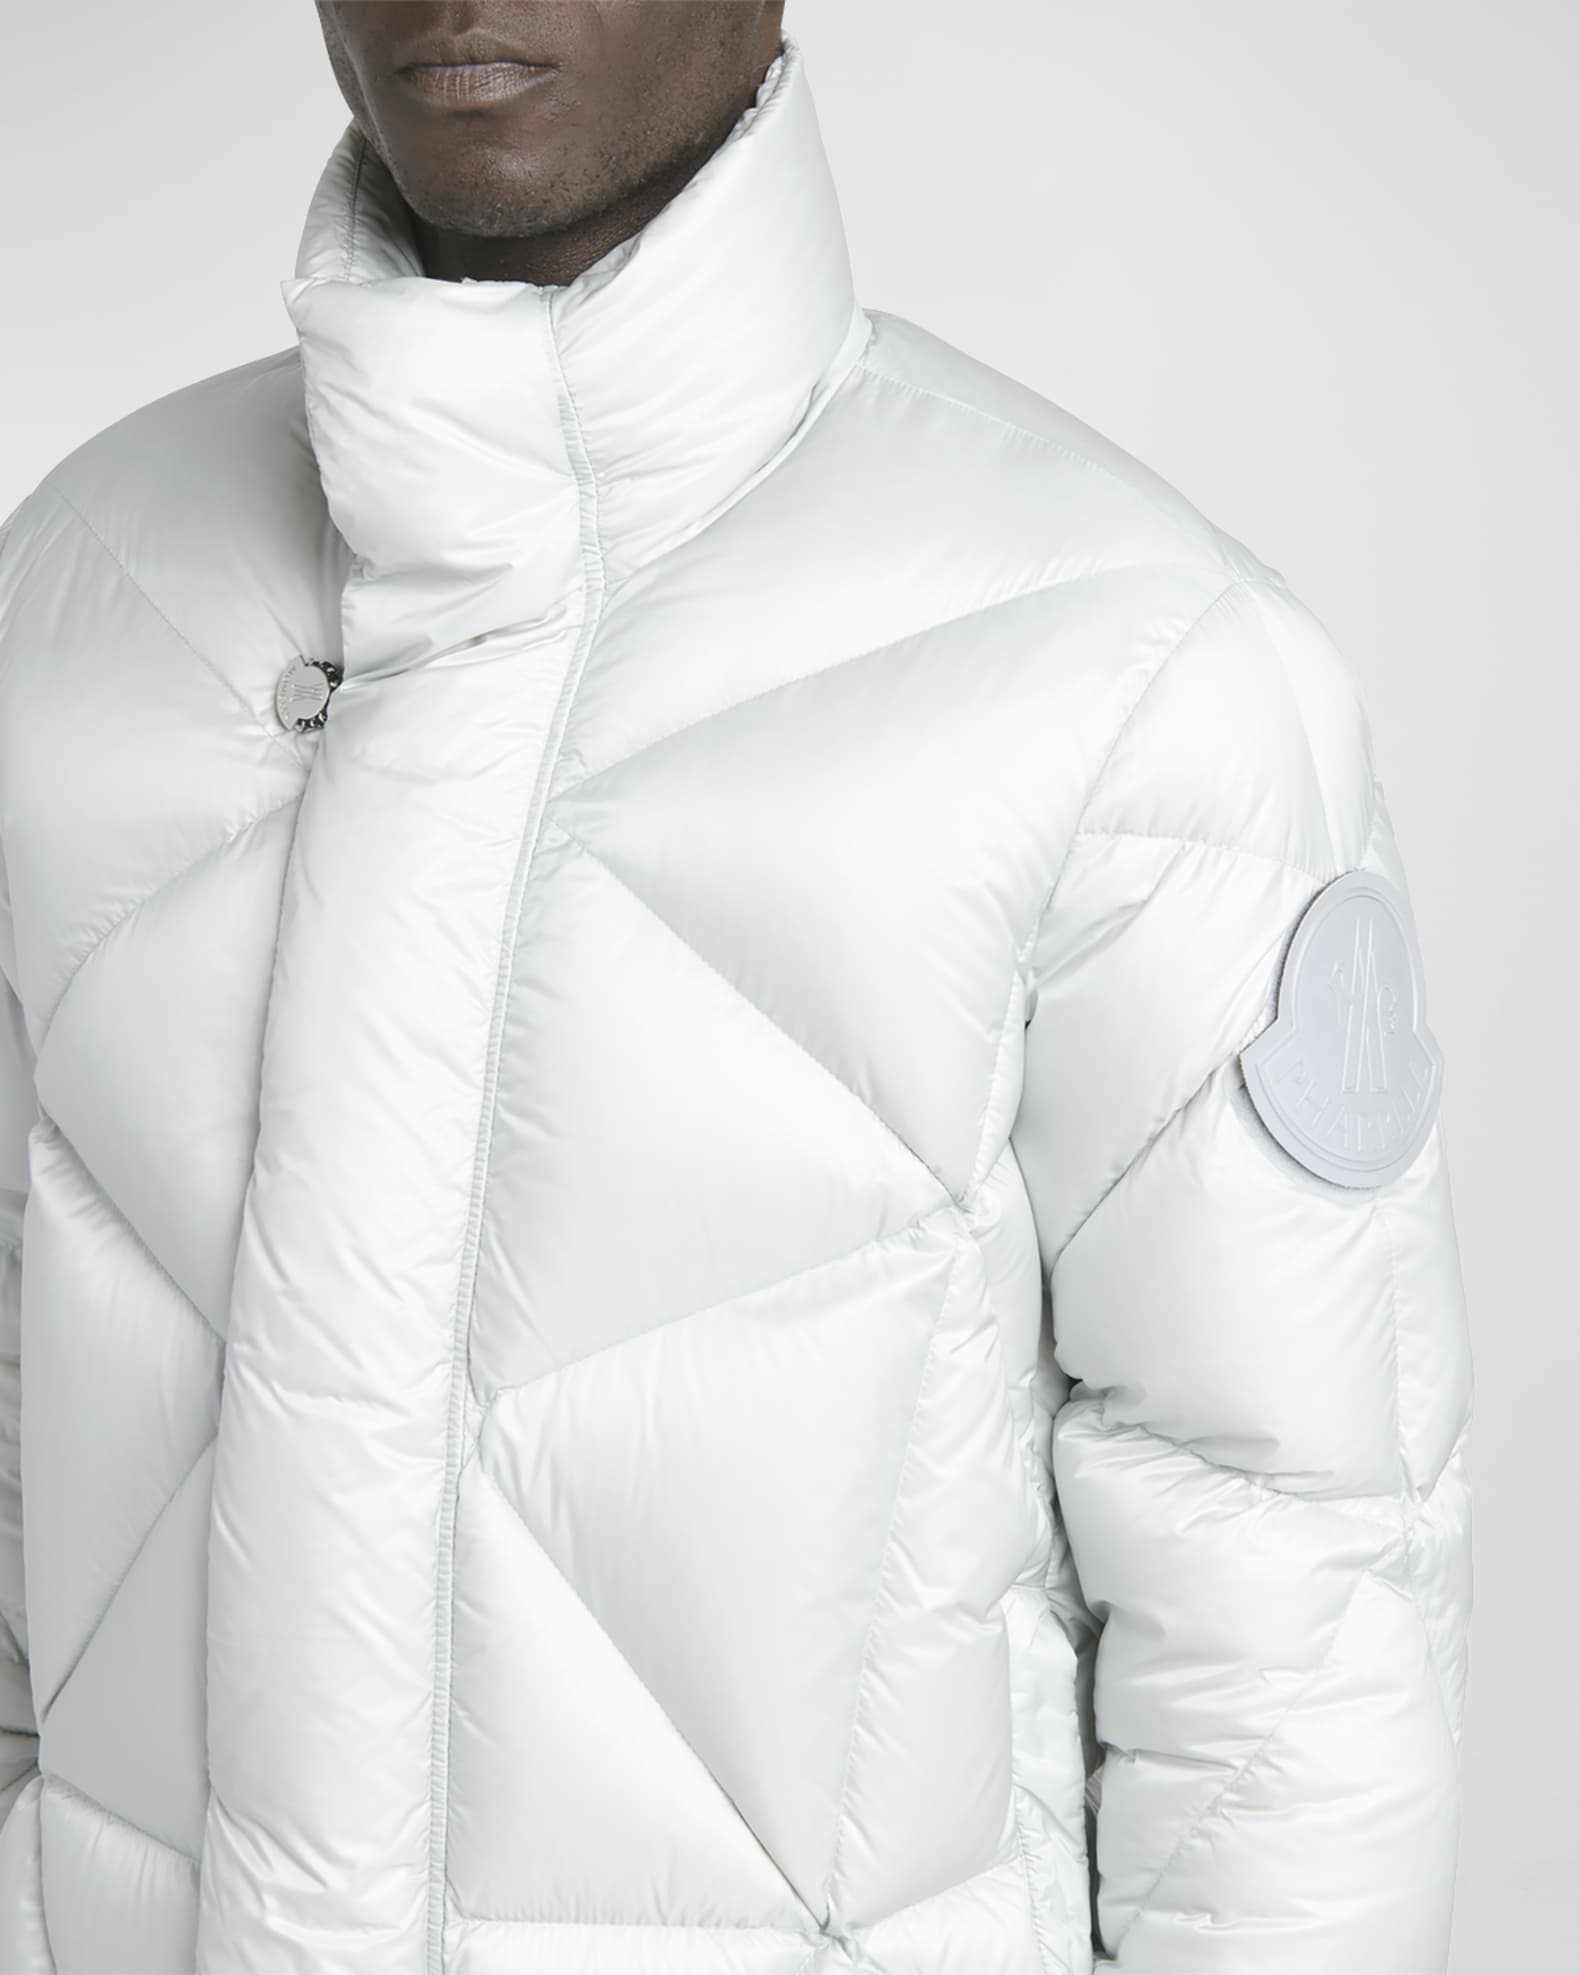 Moncler x Pharrell Williams Collection  The Party, The Performance, And  The Puffer